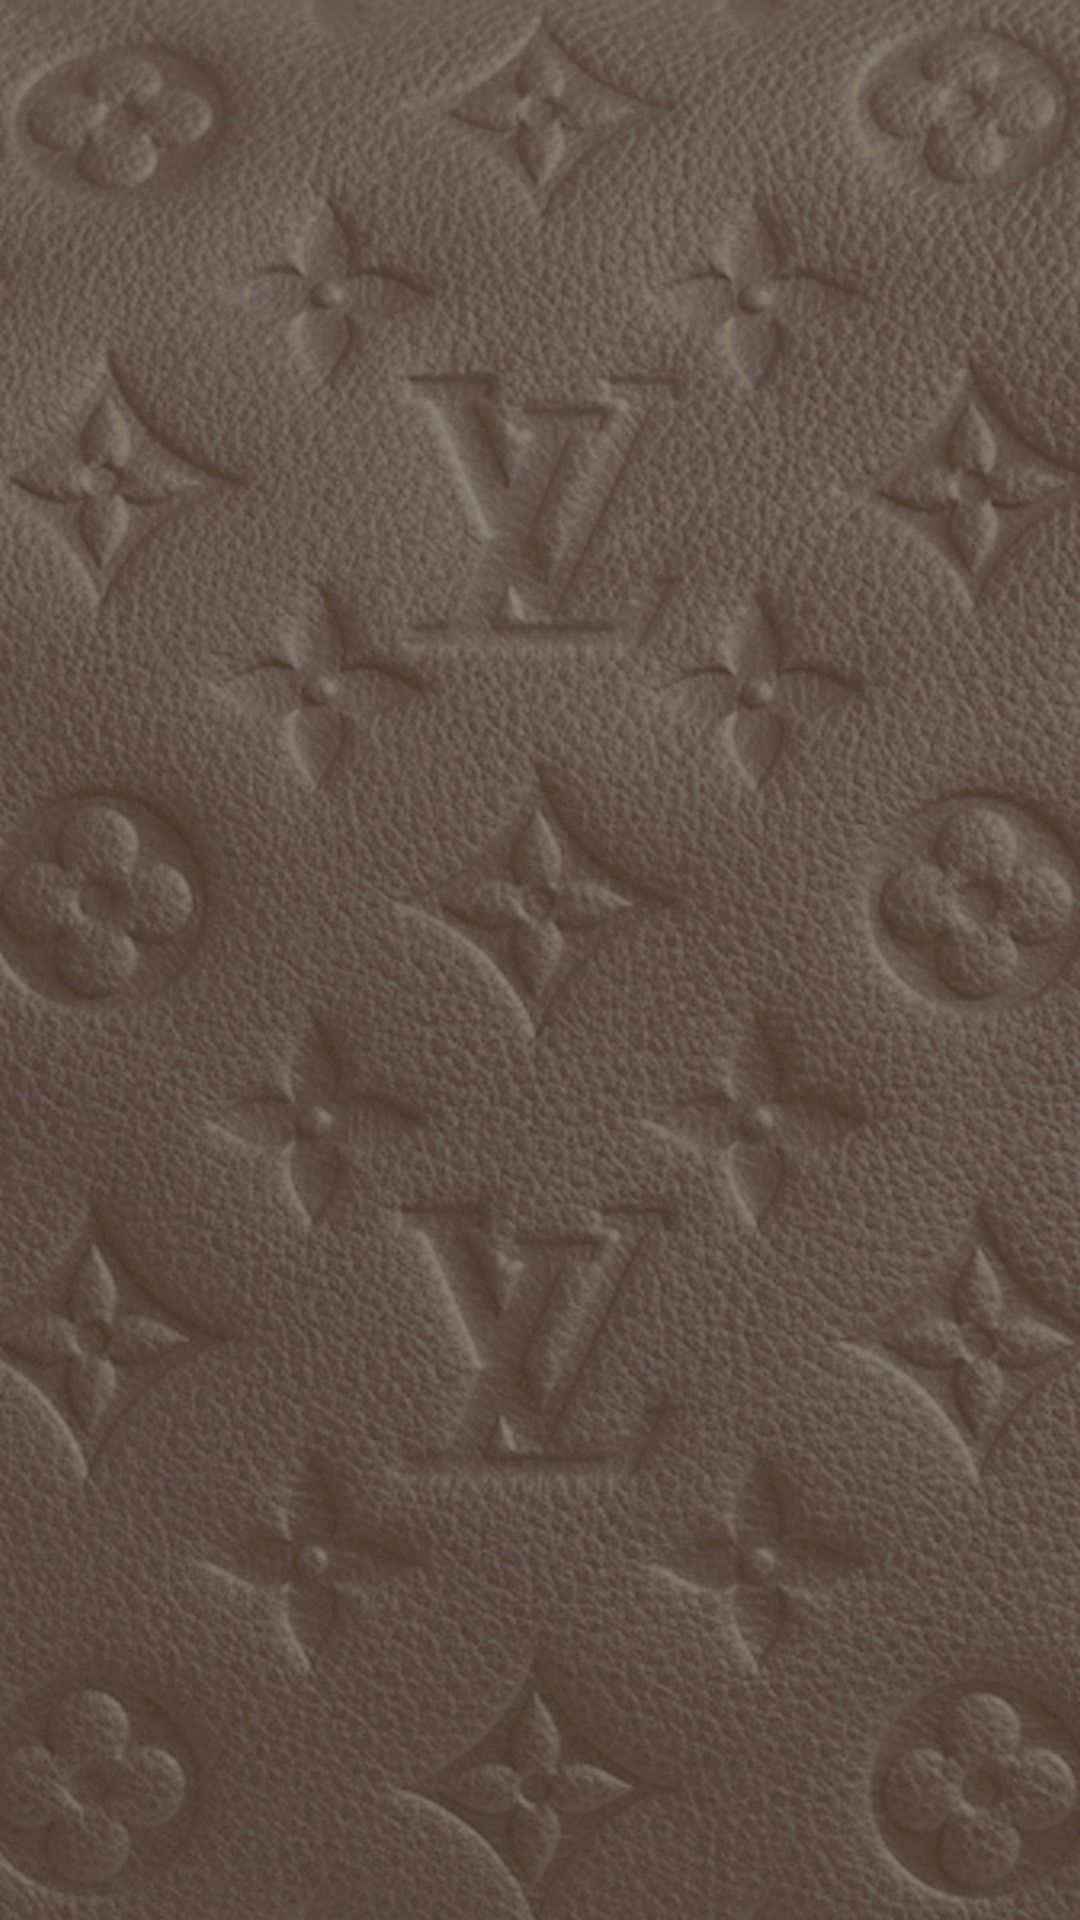 🖤 Louis Vuitton Aesthetic Background - 2021  New wallpaper iphone, Louis  vuitton iphone wallpaper, Apple wallpaper